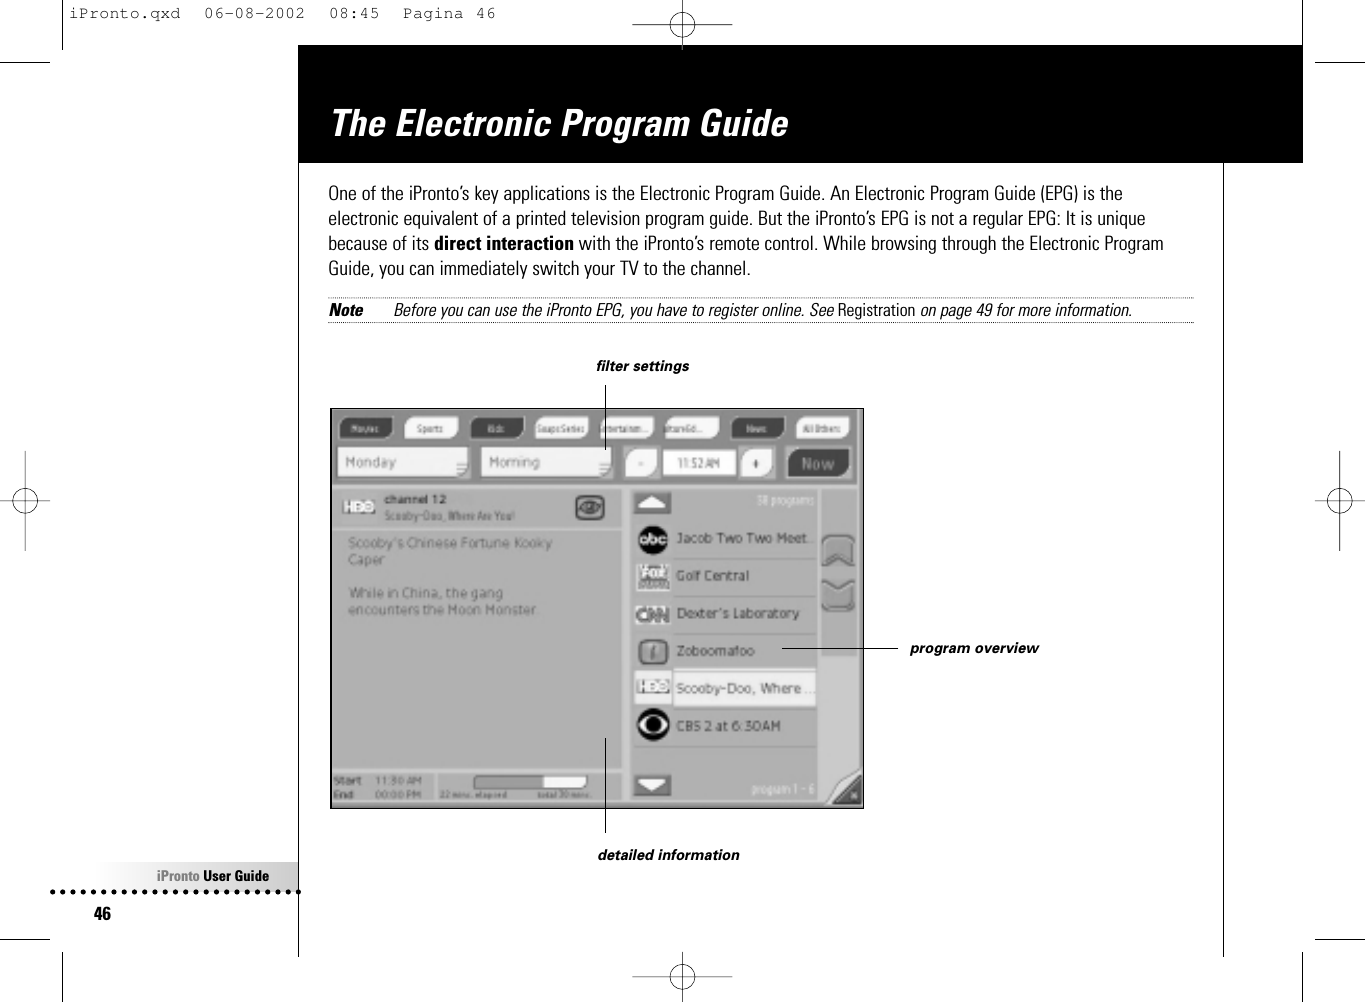 iPronto User Guide46The Electronic Program GuideOne of the iPronto’s key applications is the Electronic Program Guide. An Electronic Program Guide (EPG) is theelectronic equivalent of a printed television program guide. But the iPronto’s EPG is not a regular EPG: It is uniquebecause of its direct interaction with the iPronto’s remote control. While browsing through the Electronic ProgramGuide, you can immediately switch your TV to the channel.Note Before you can use the iPronto EPG, you have to register online. See Registration on page 49 for more information.detailed informationprogram overviewfilter settingsiPronto.qxd  06-08-2002  08:45  Pagina 46